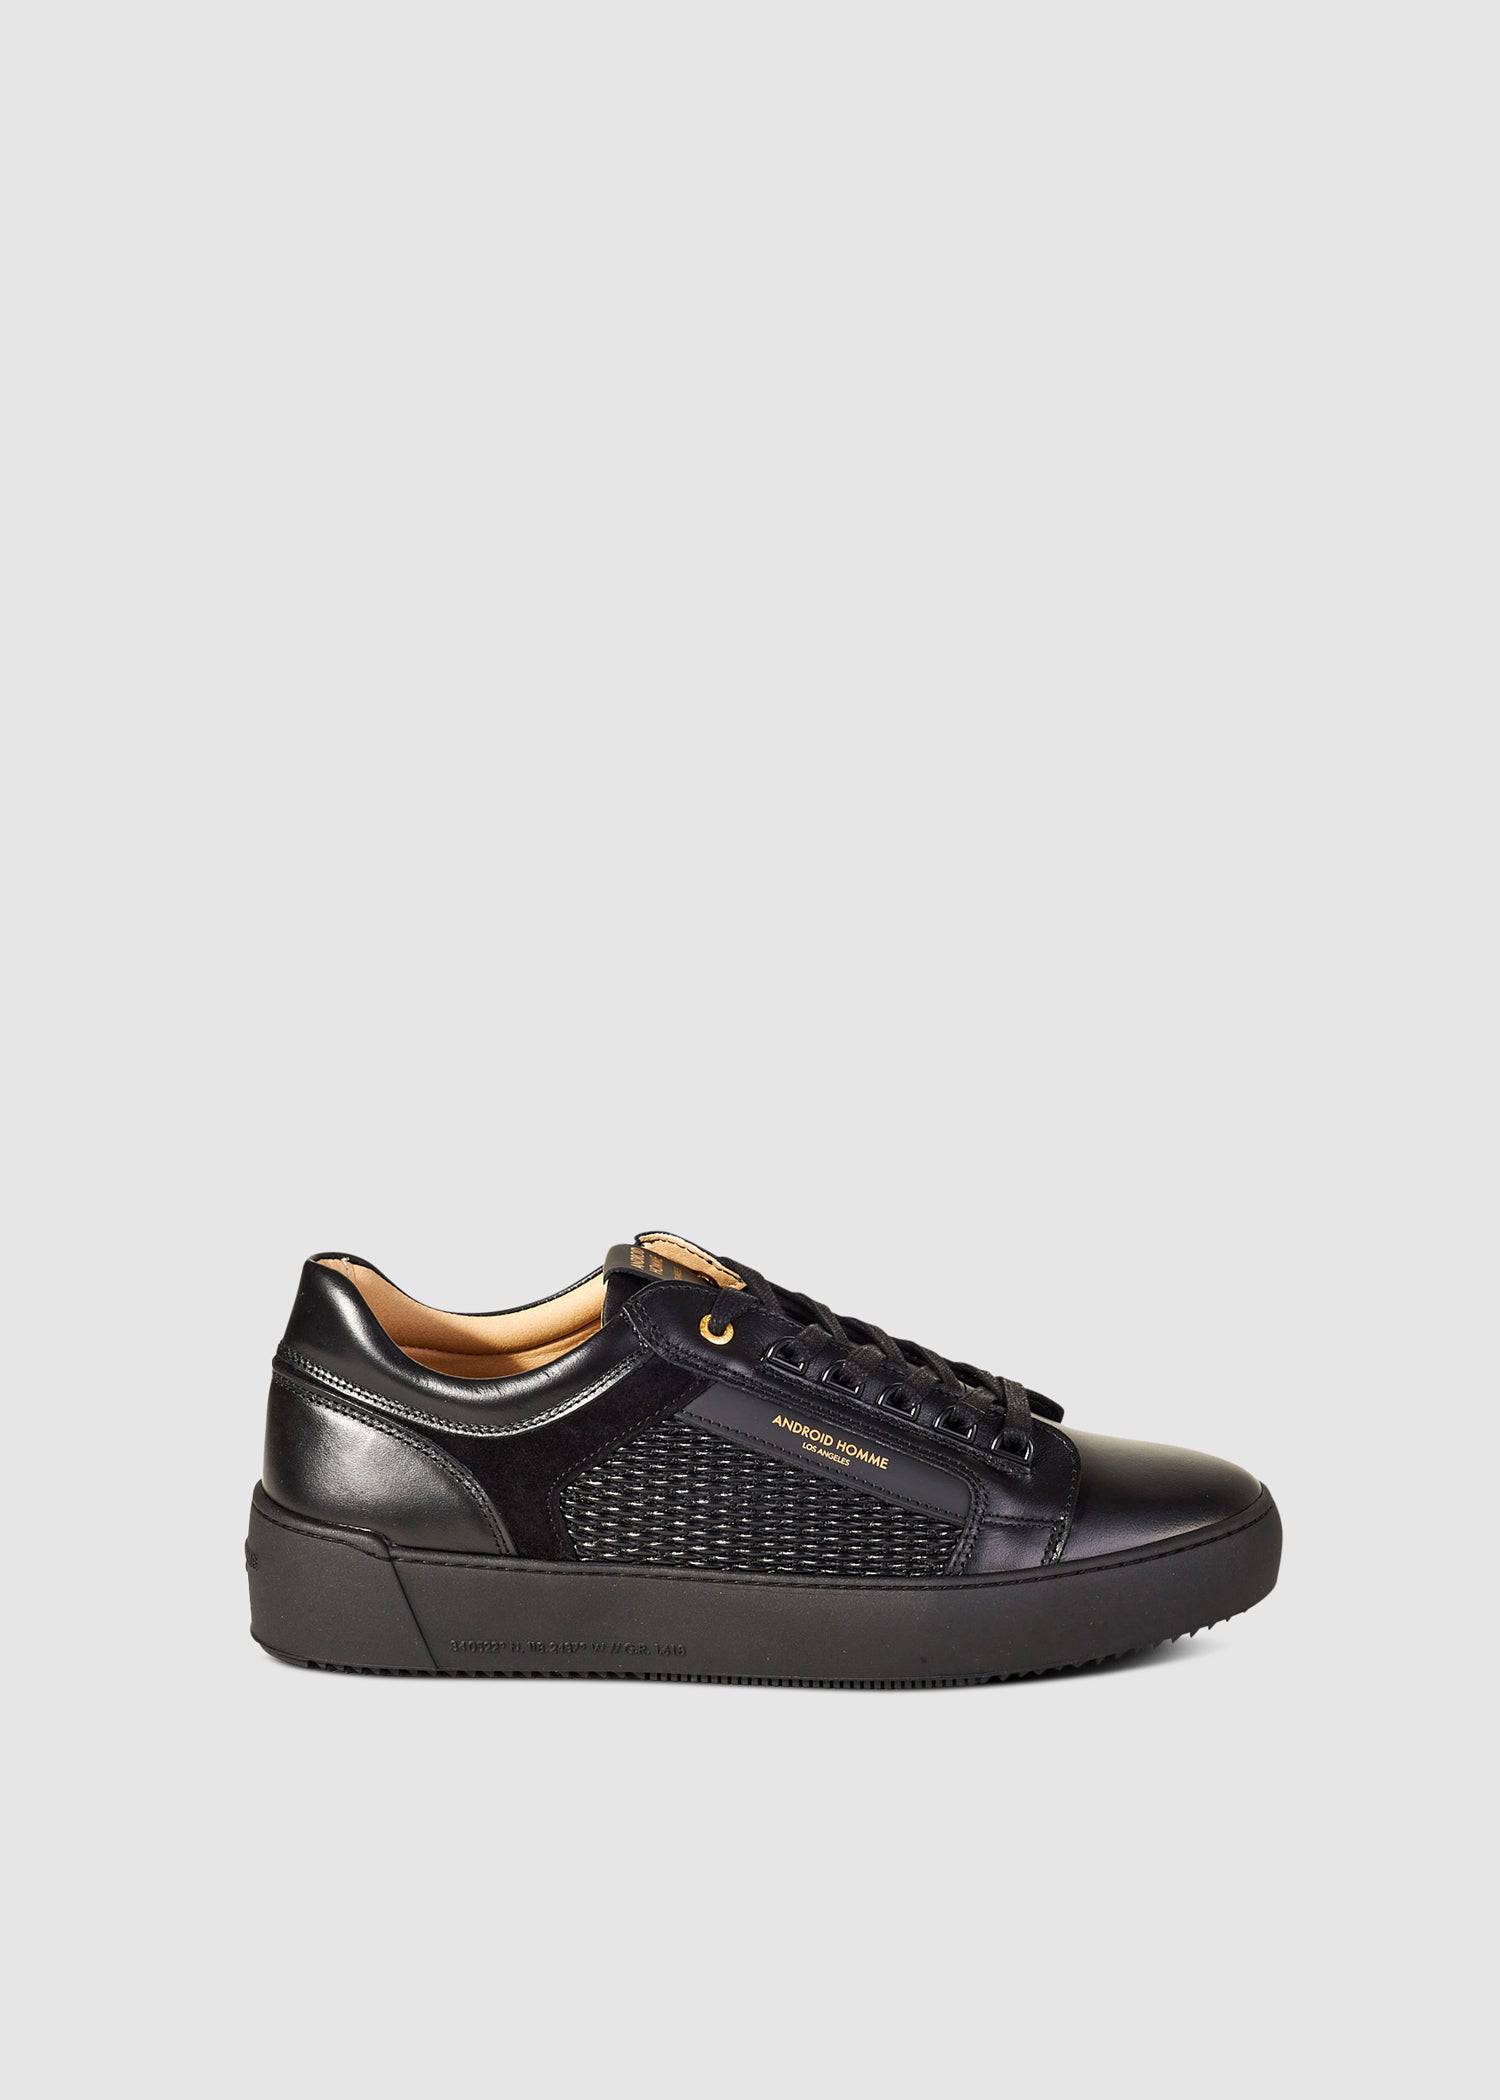 Android Homme Mens Venice Stretch Woven Trainers